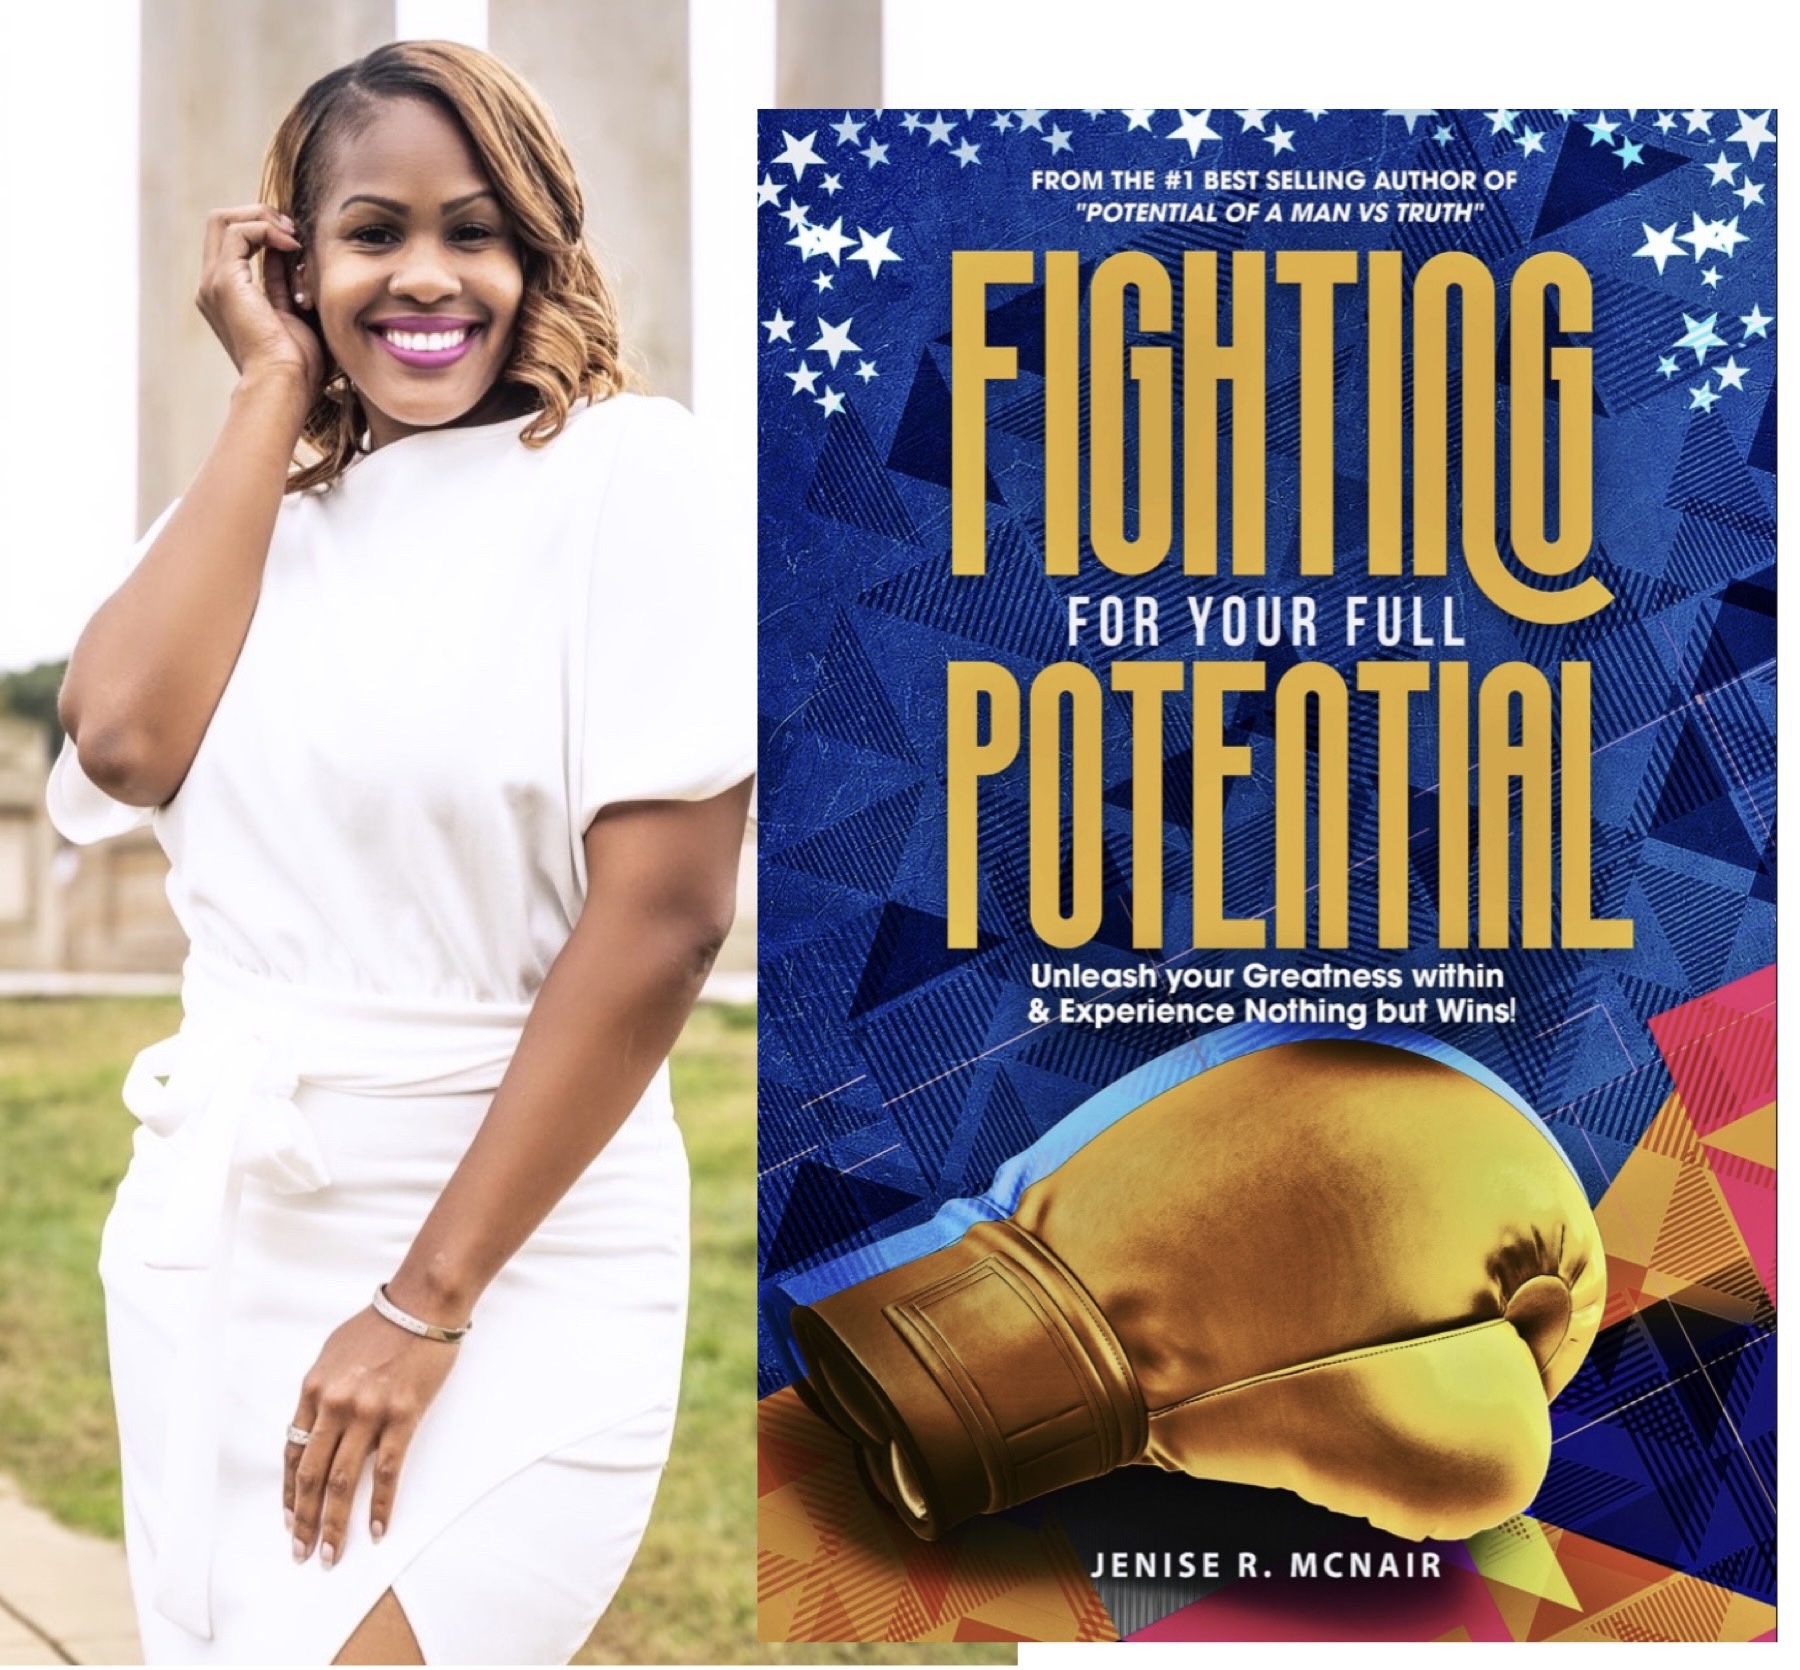 Jenise McNair becomes a #1 International Bestselling Author, from her 2nd book released for the year titled: "Fighting For Your Full Potential".